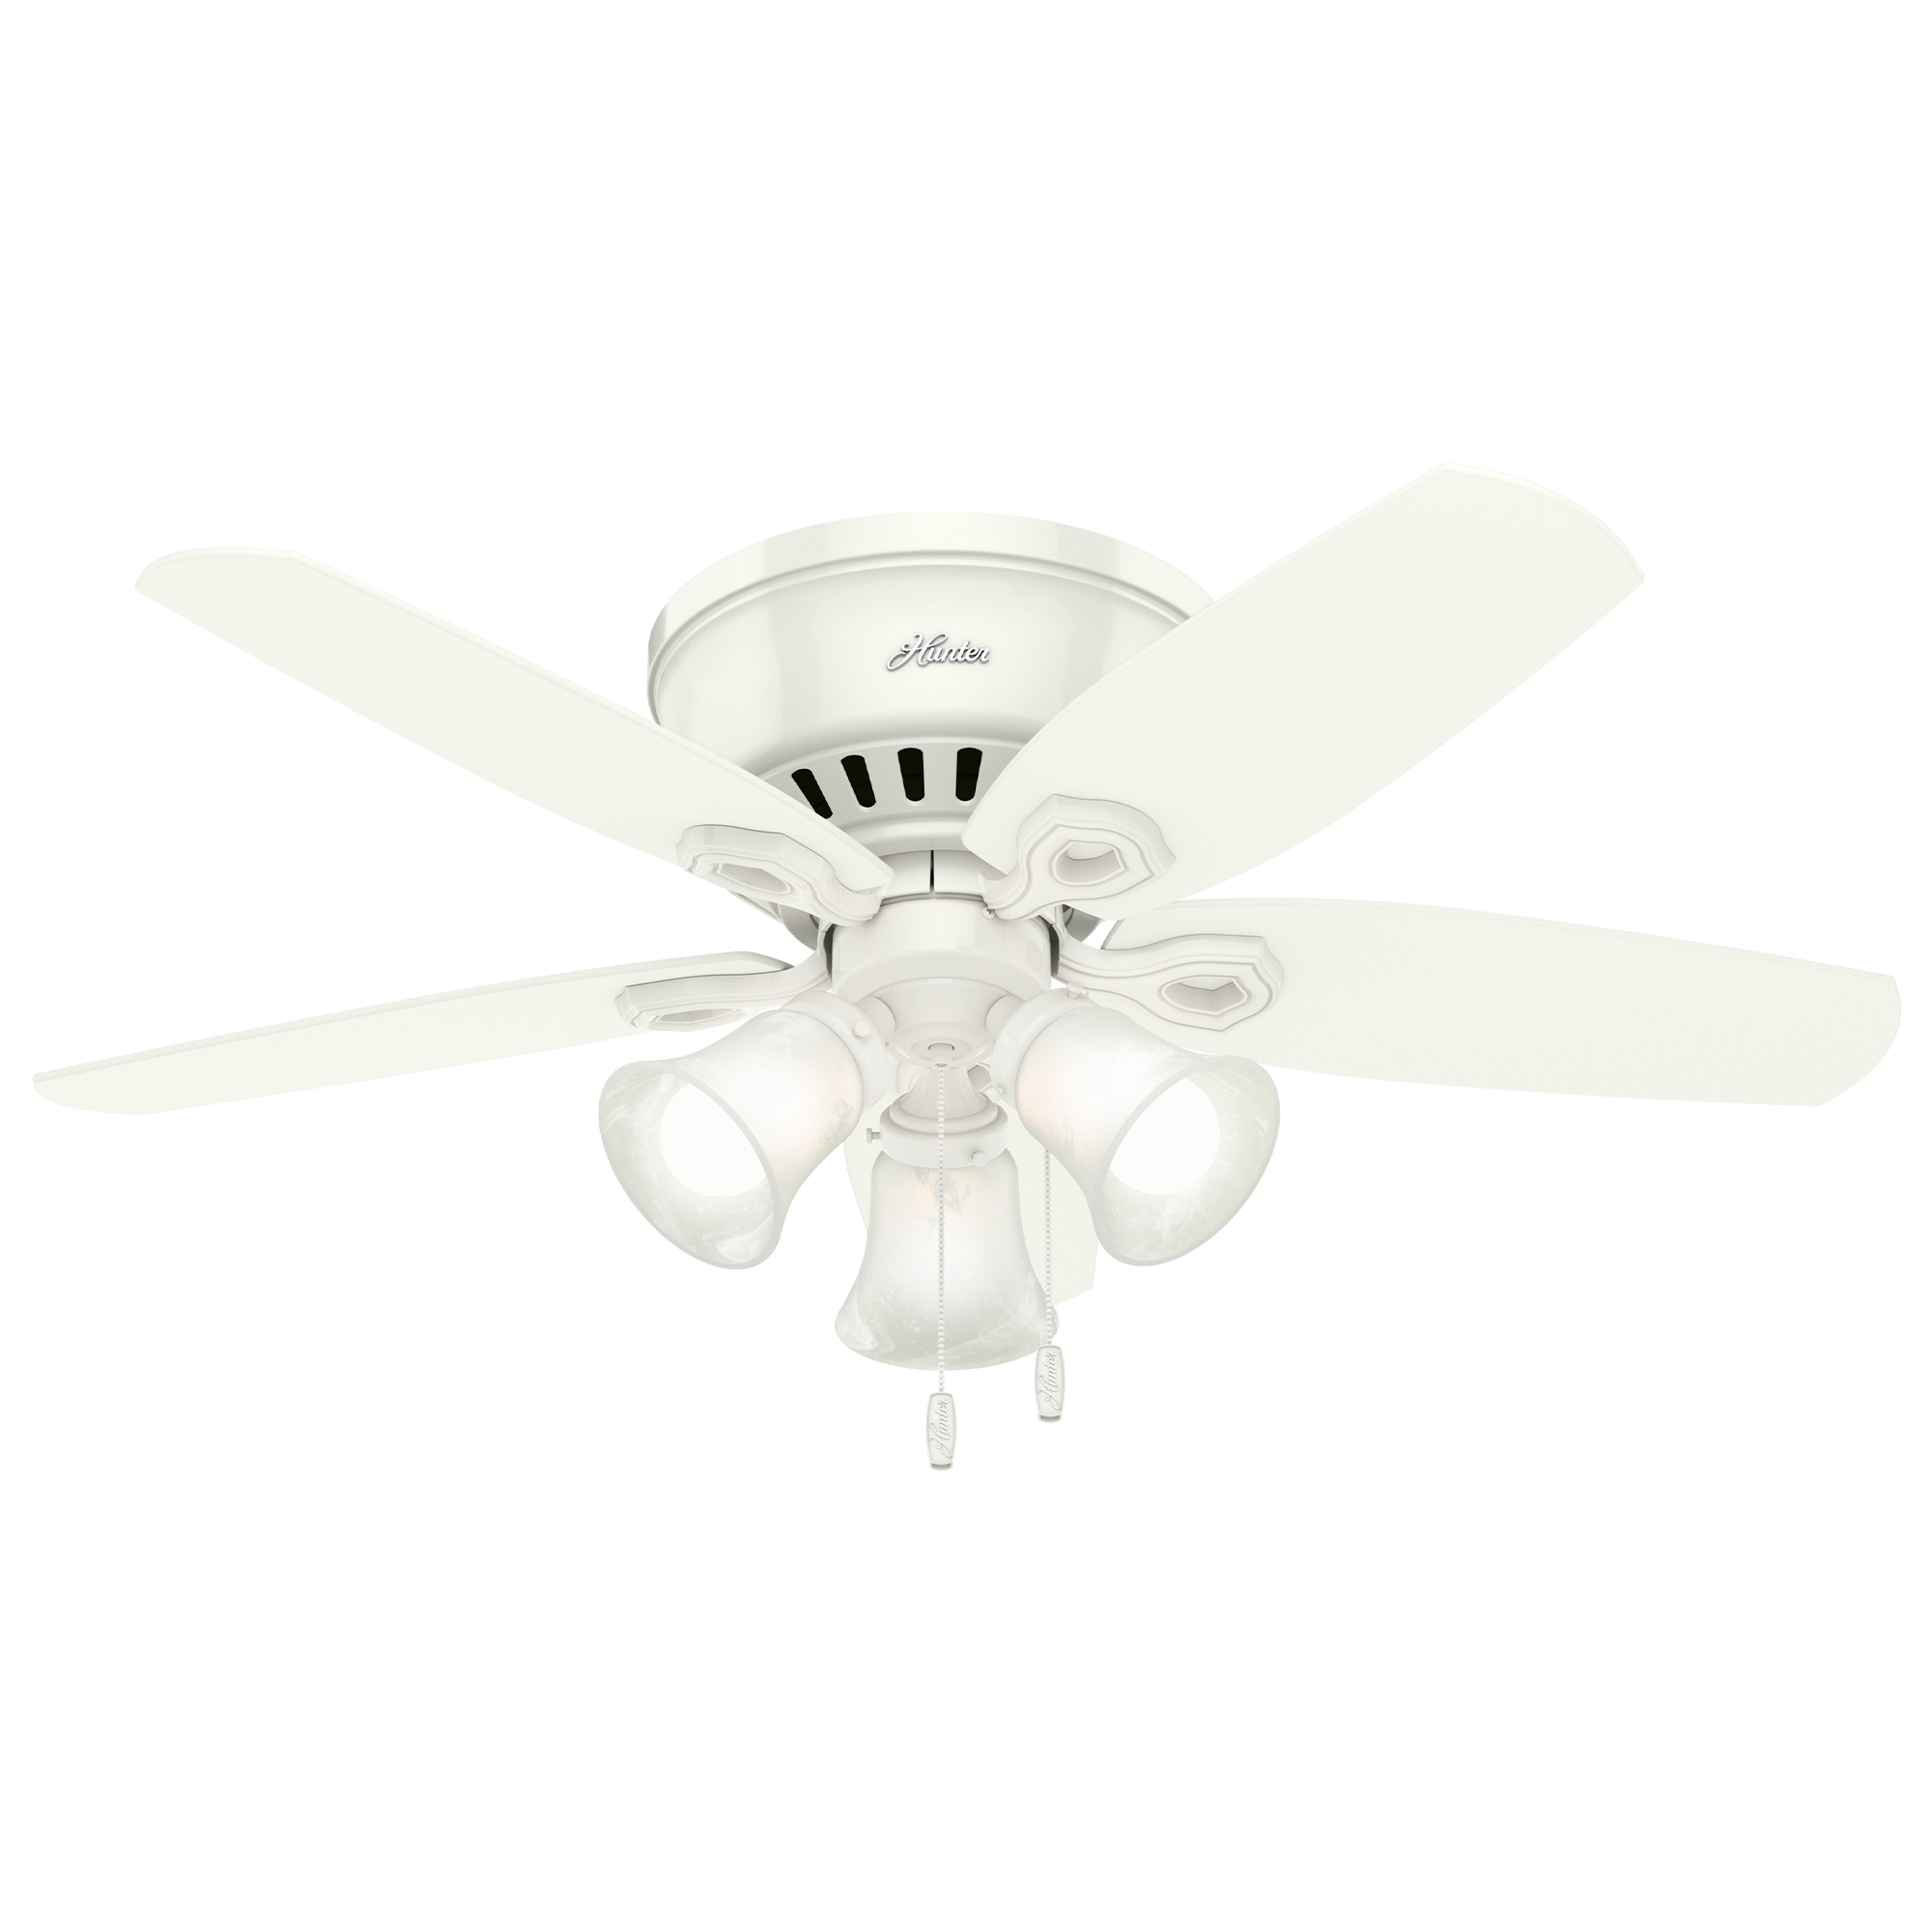 Hunter 42 inch Builder Low Profile Ceiling Fan with LED Light Kit and Pull Chain